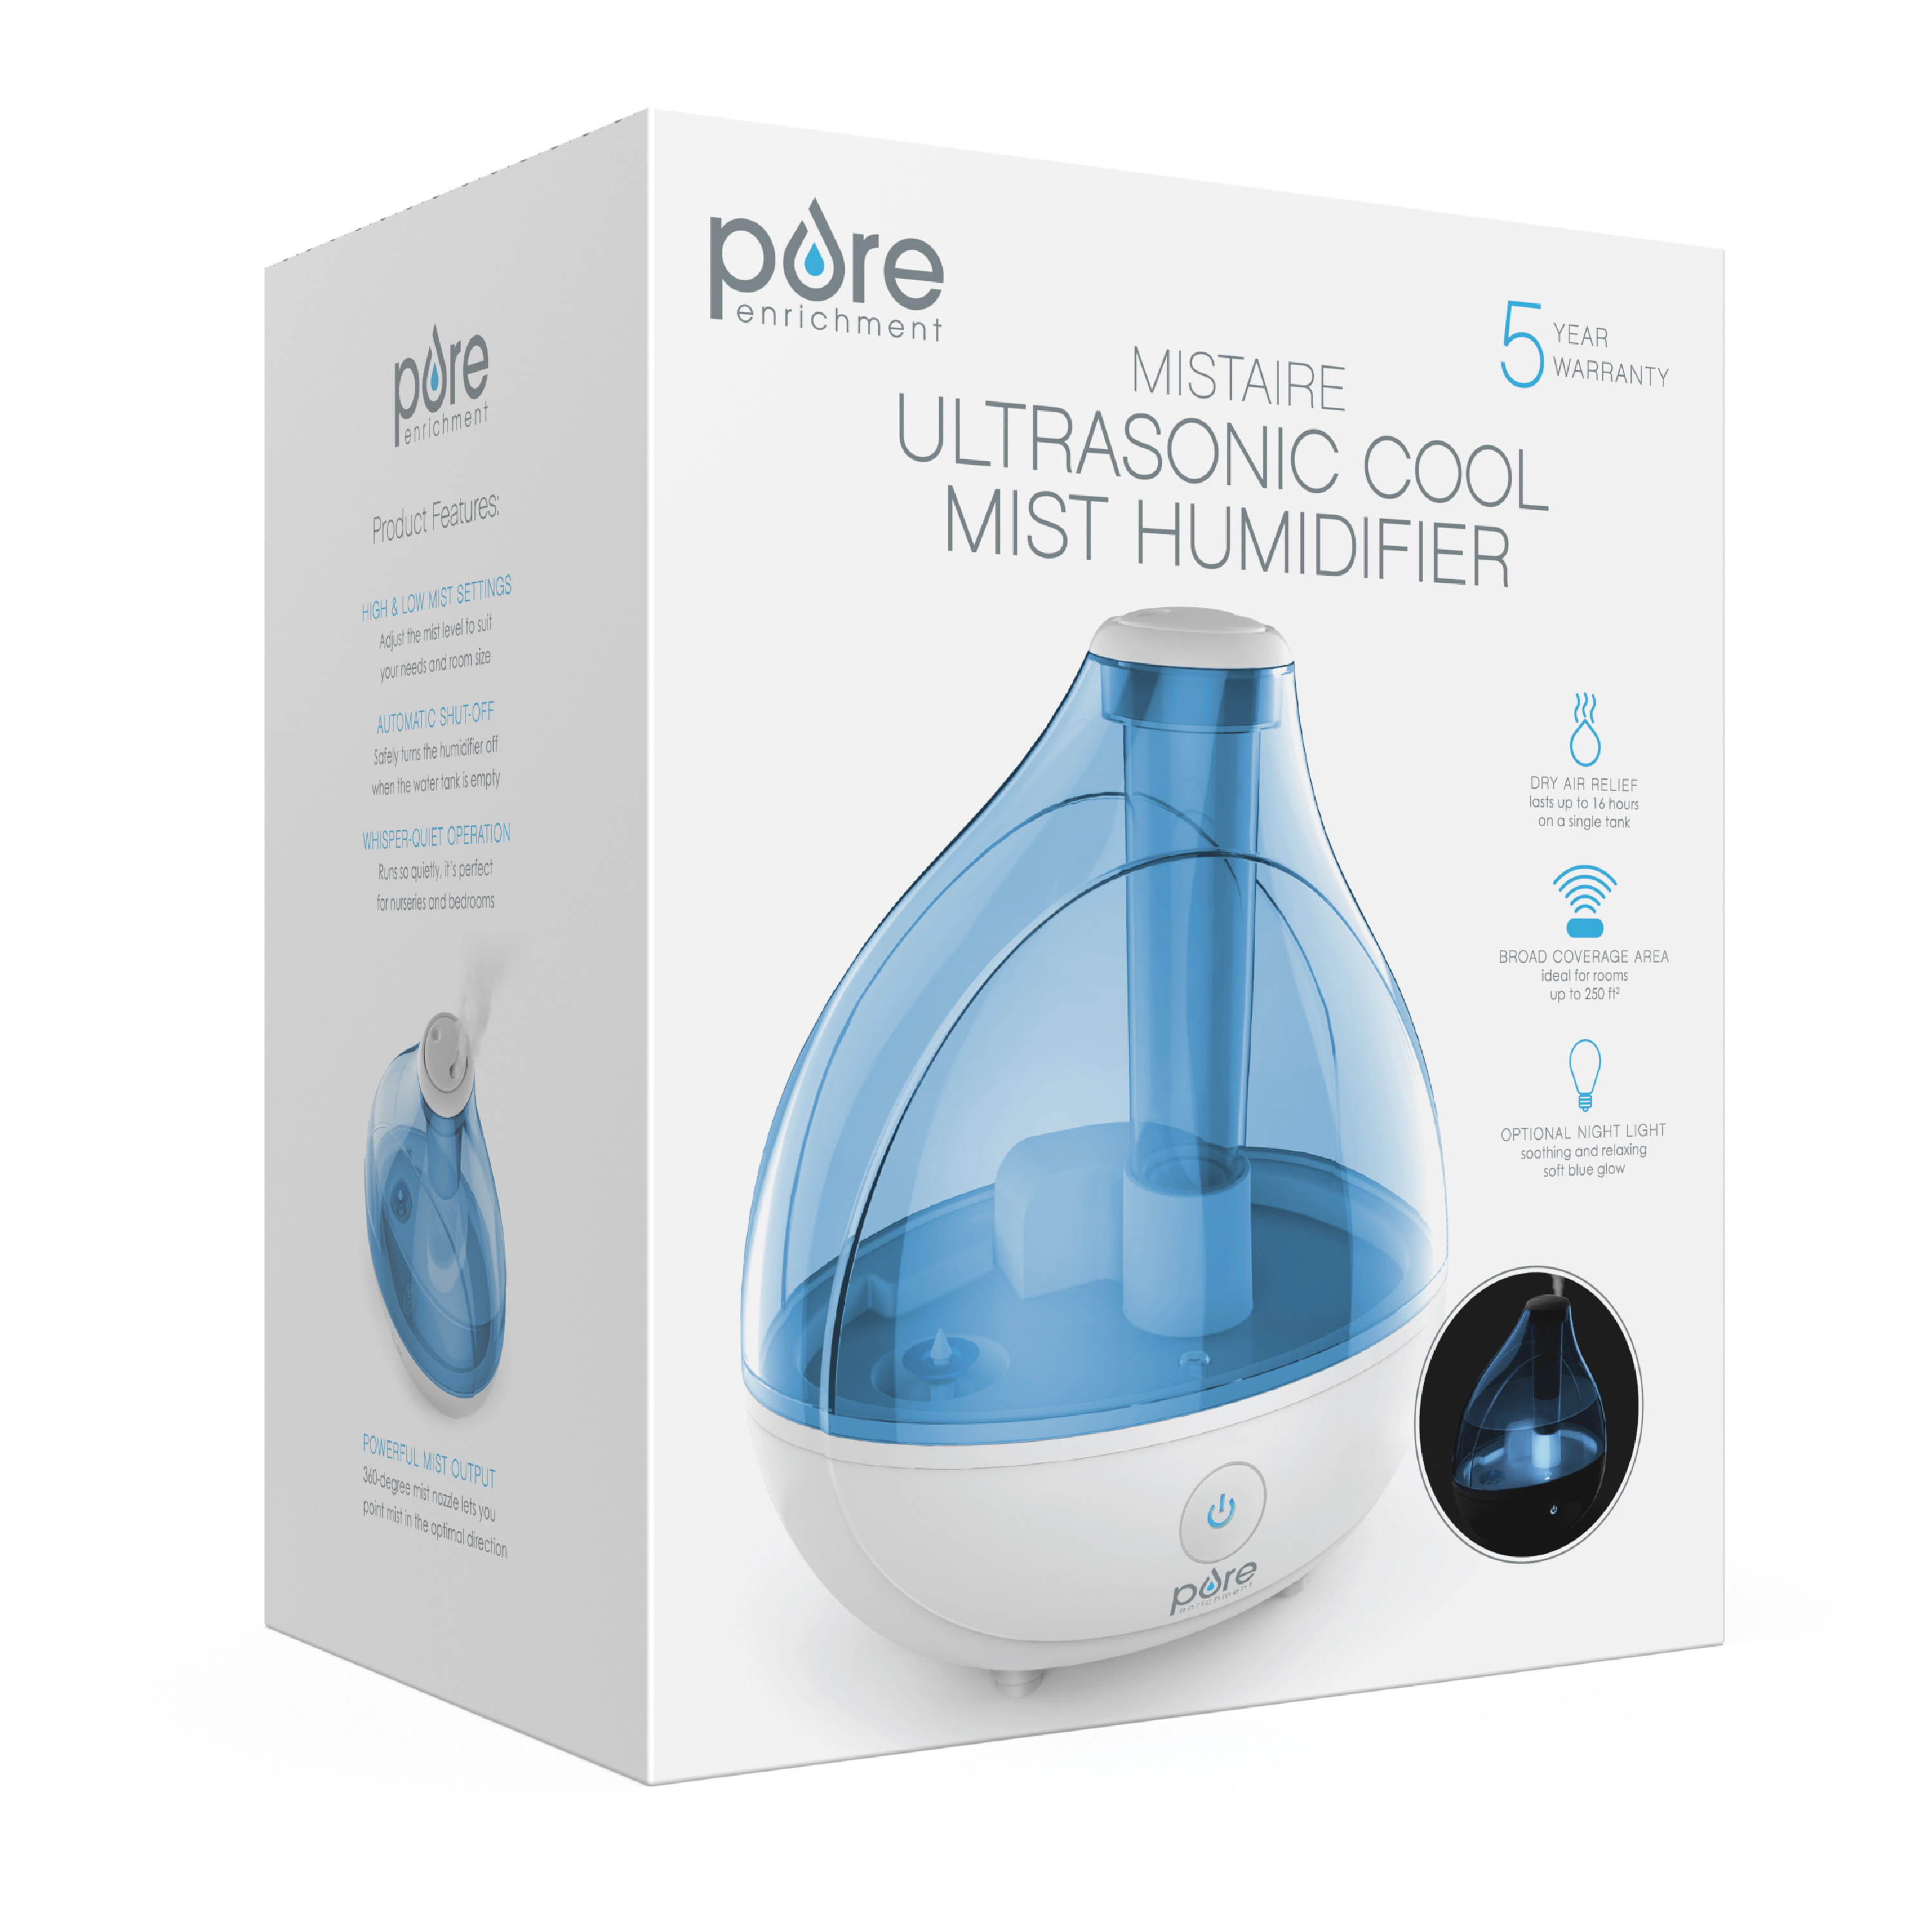 Pure Enrichment MistAire Ultrasonic Cool Mist Humidifier - Quiet Air Humidifier That Lasts Up To 25 Hours, 360° Rotation Nozzle, Auto Shut-Off, Night Light - image 5 of 9